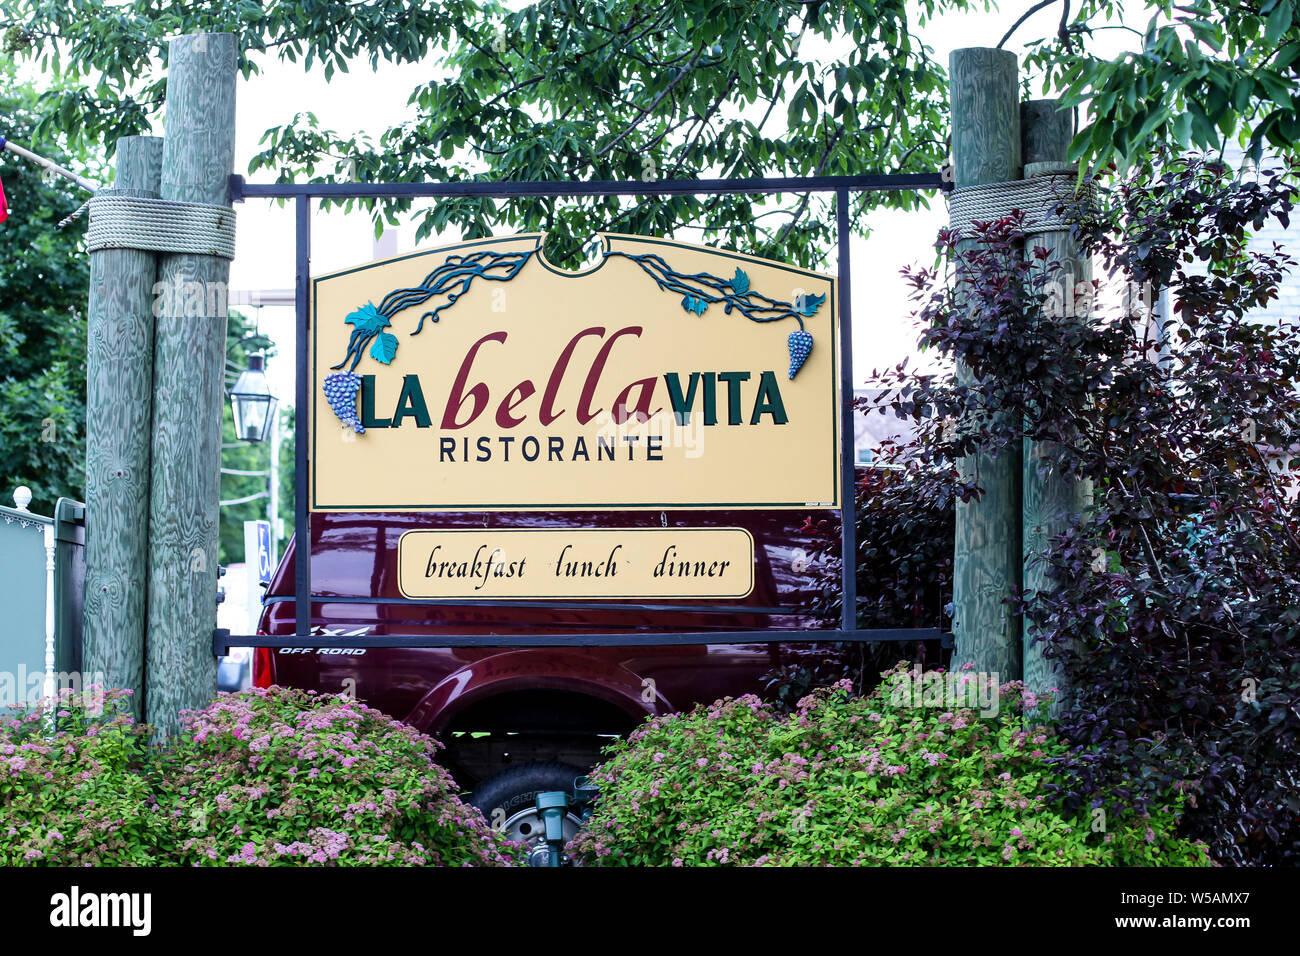 BAR HARBOR, MAINE - JULY 11, 2013:  Sign for La Bella Vita ristorante with great and tasty food in Bar Harbor. Stock Photo